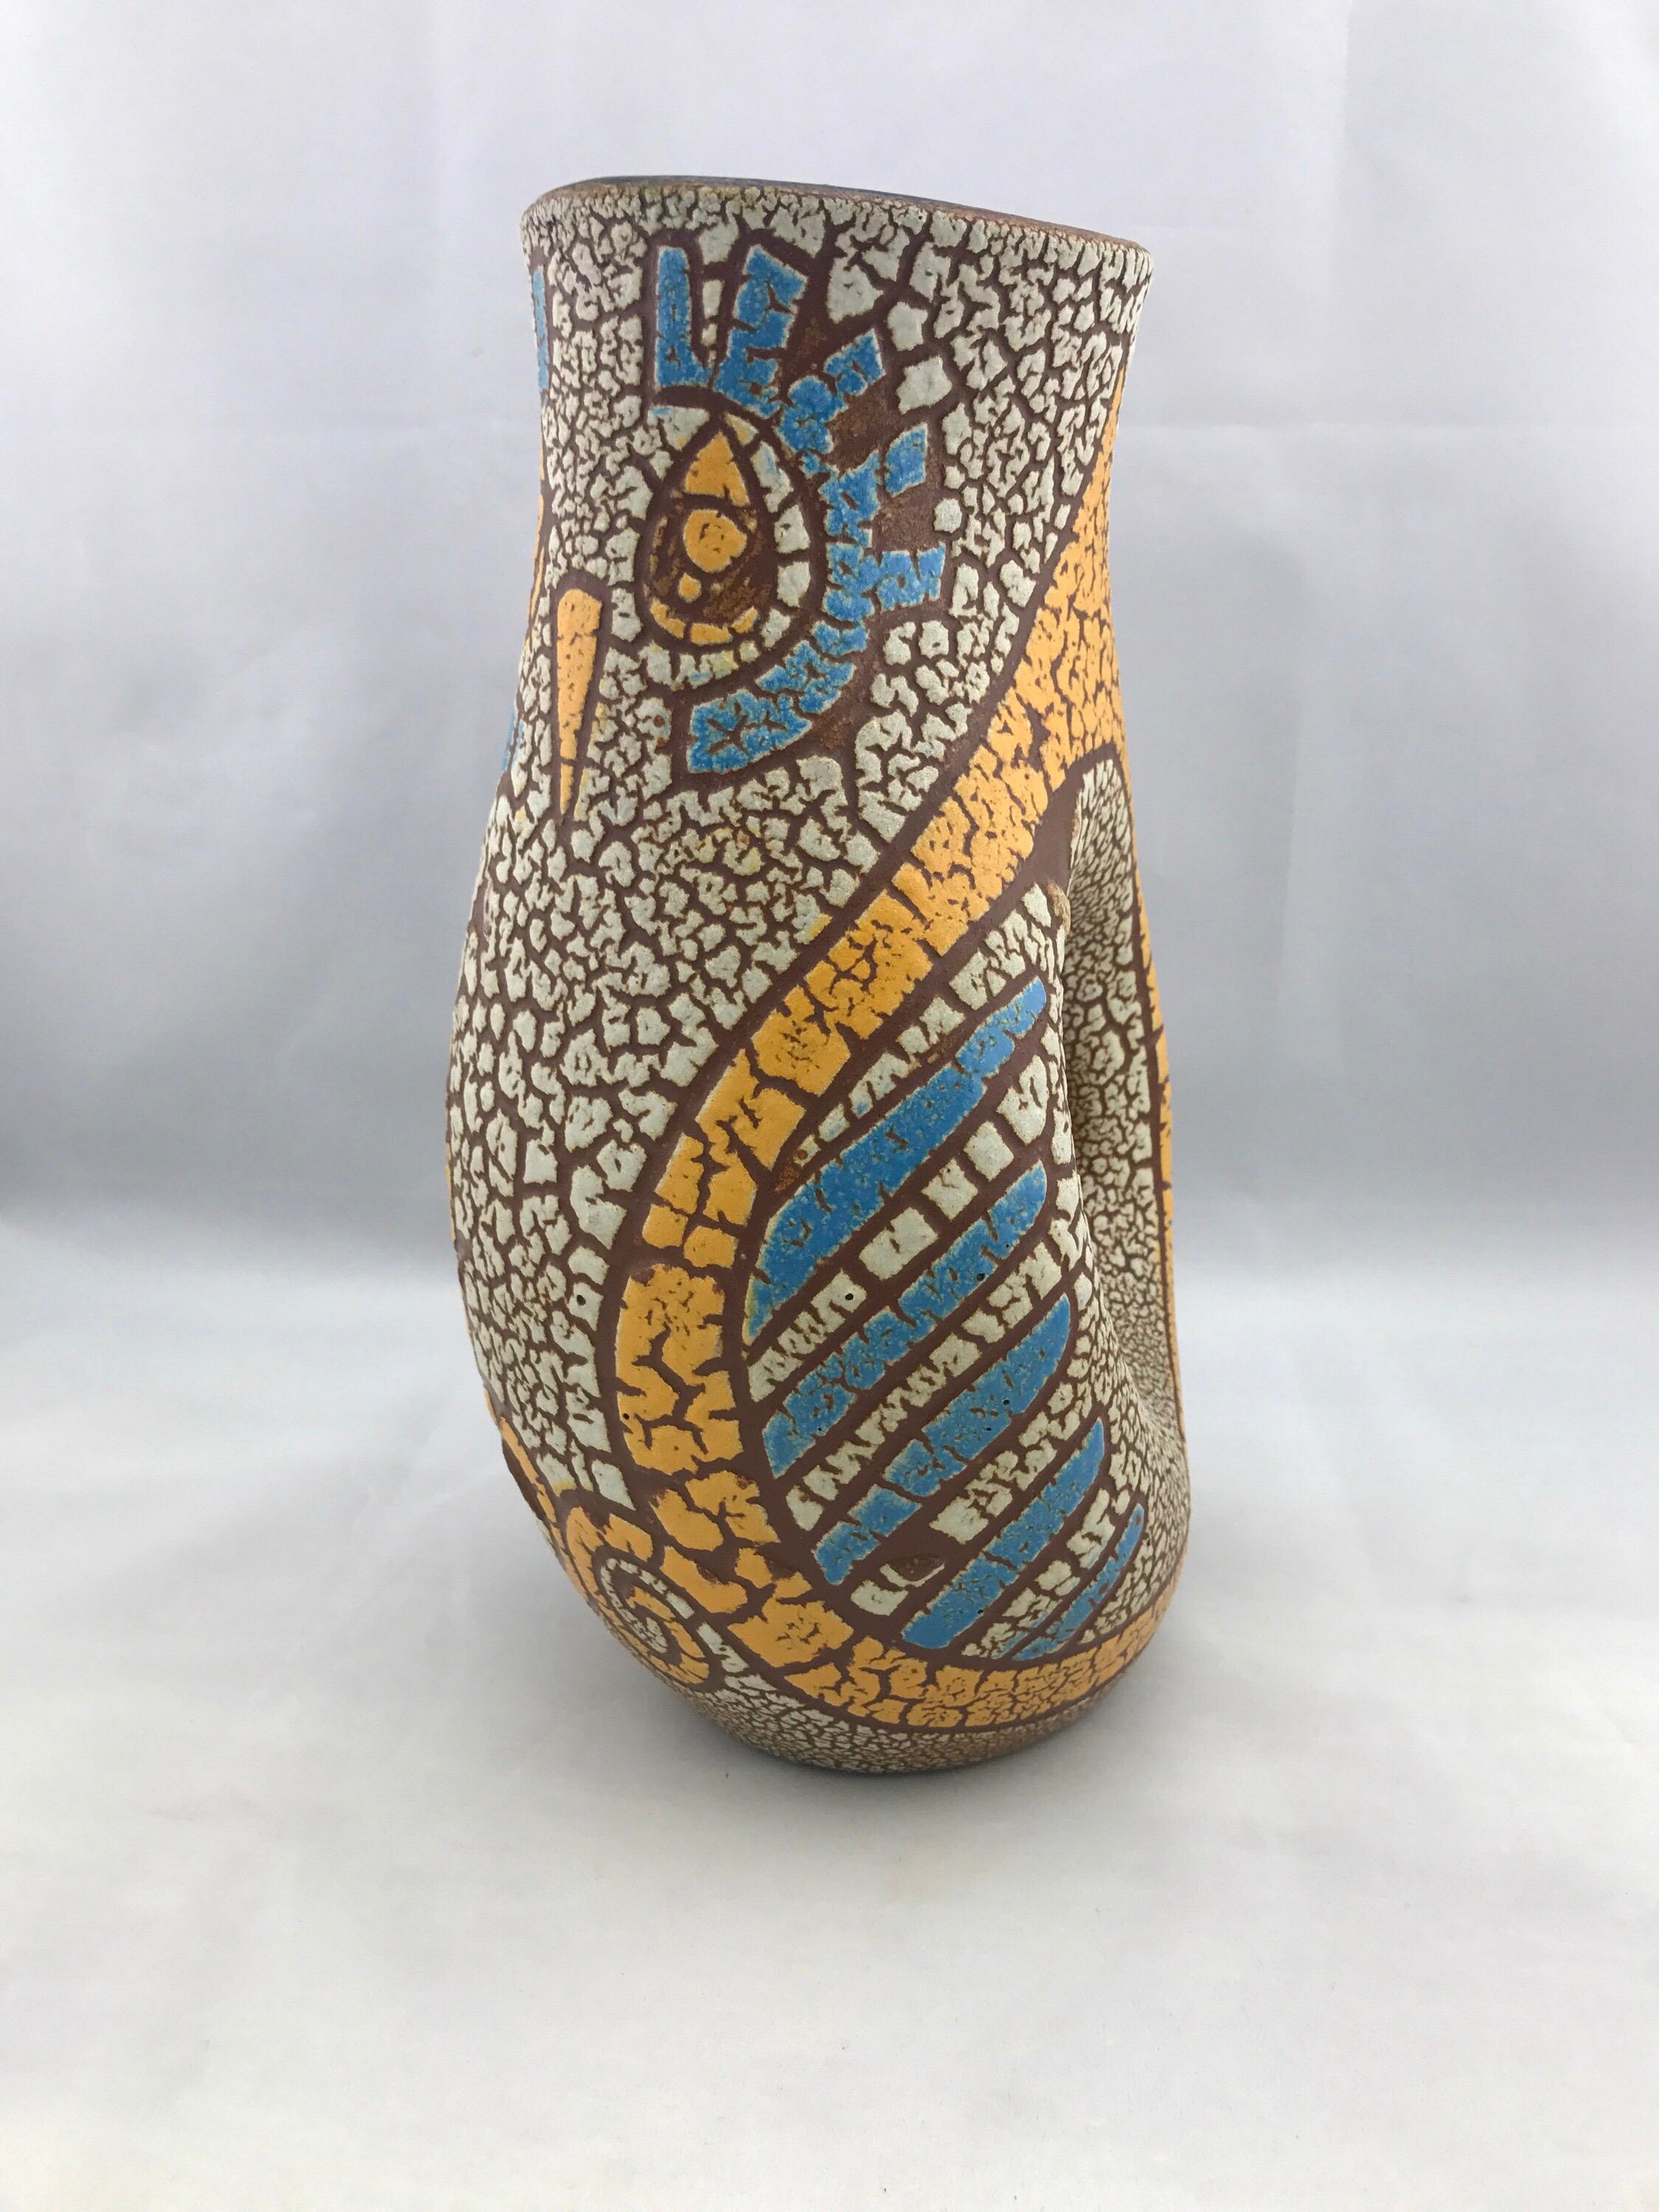 Mid-20th Century Mid-Century Modern French Vase by Accolay, Vintage Blue and Yellow Modernist Owl